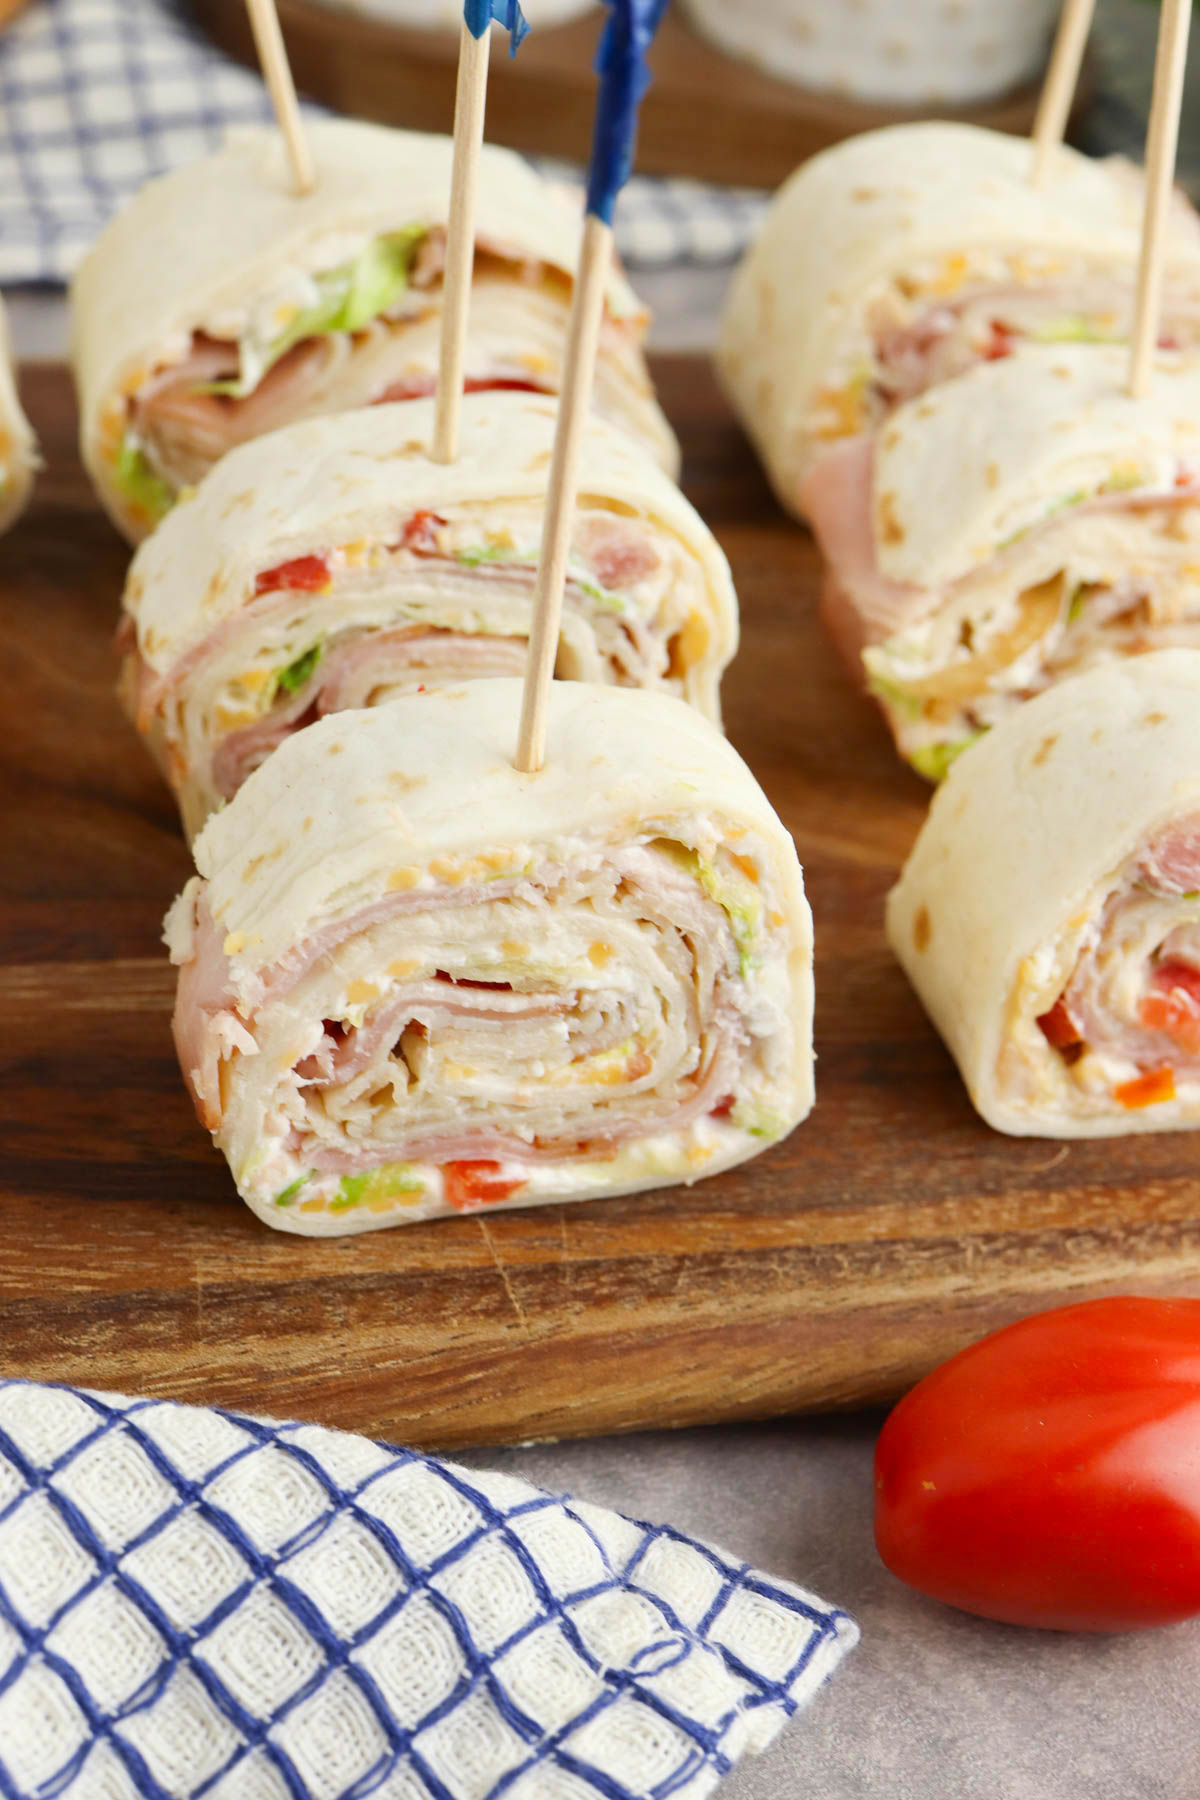 Turkey and cheese wraps with lettuce and tomatoes on a wooden cutting board, secured with toothpicks.